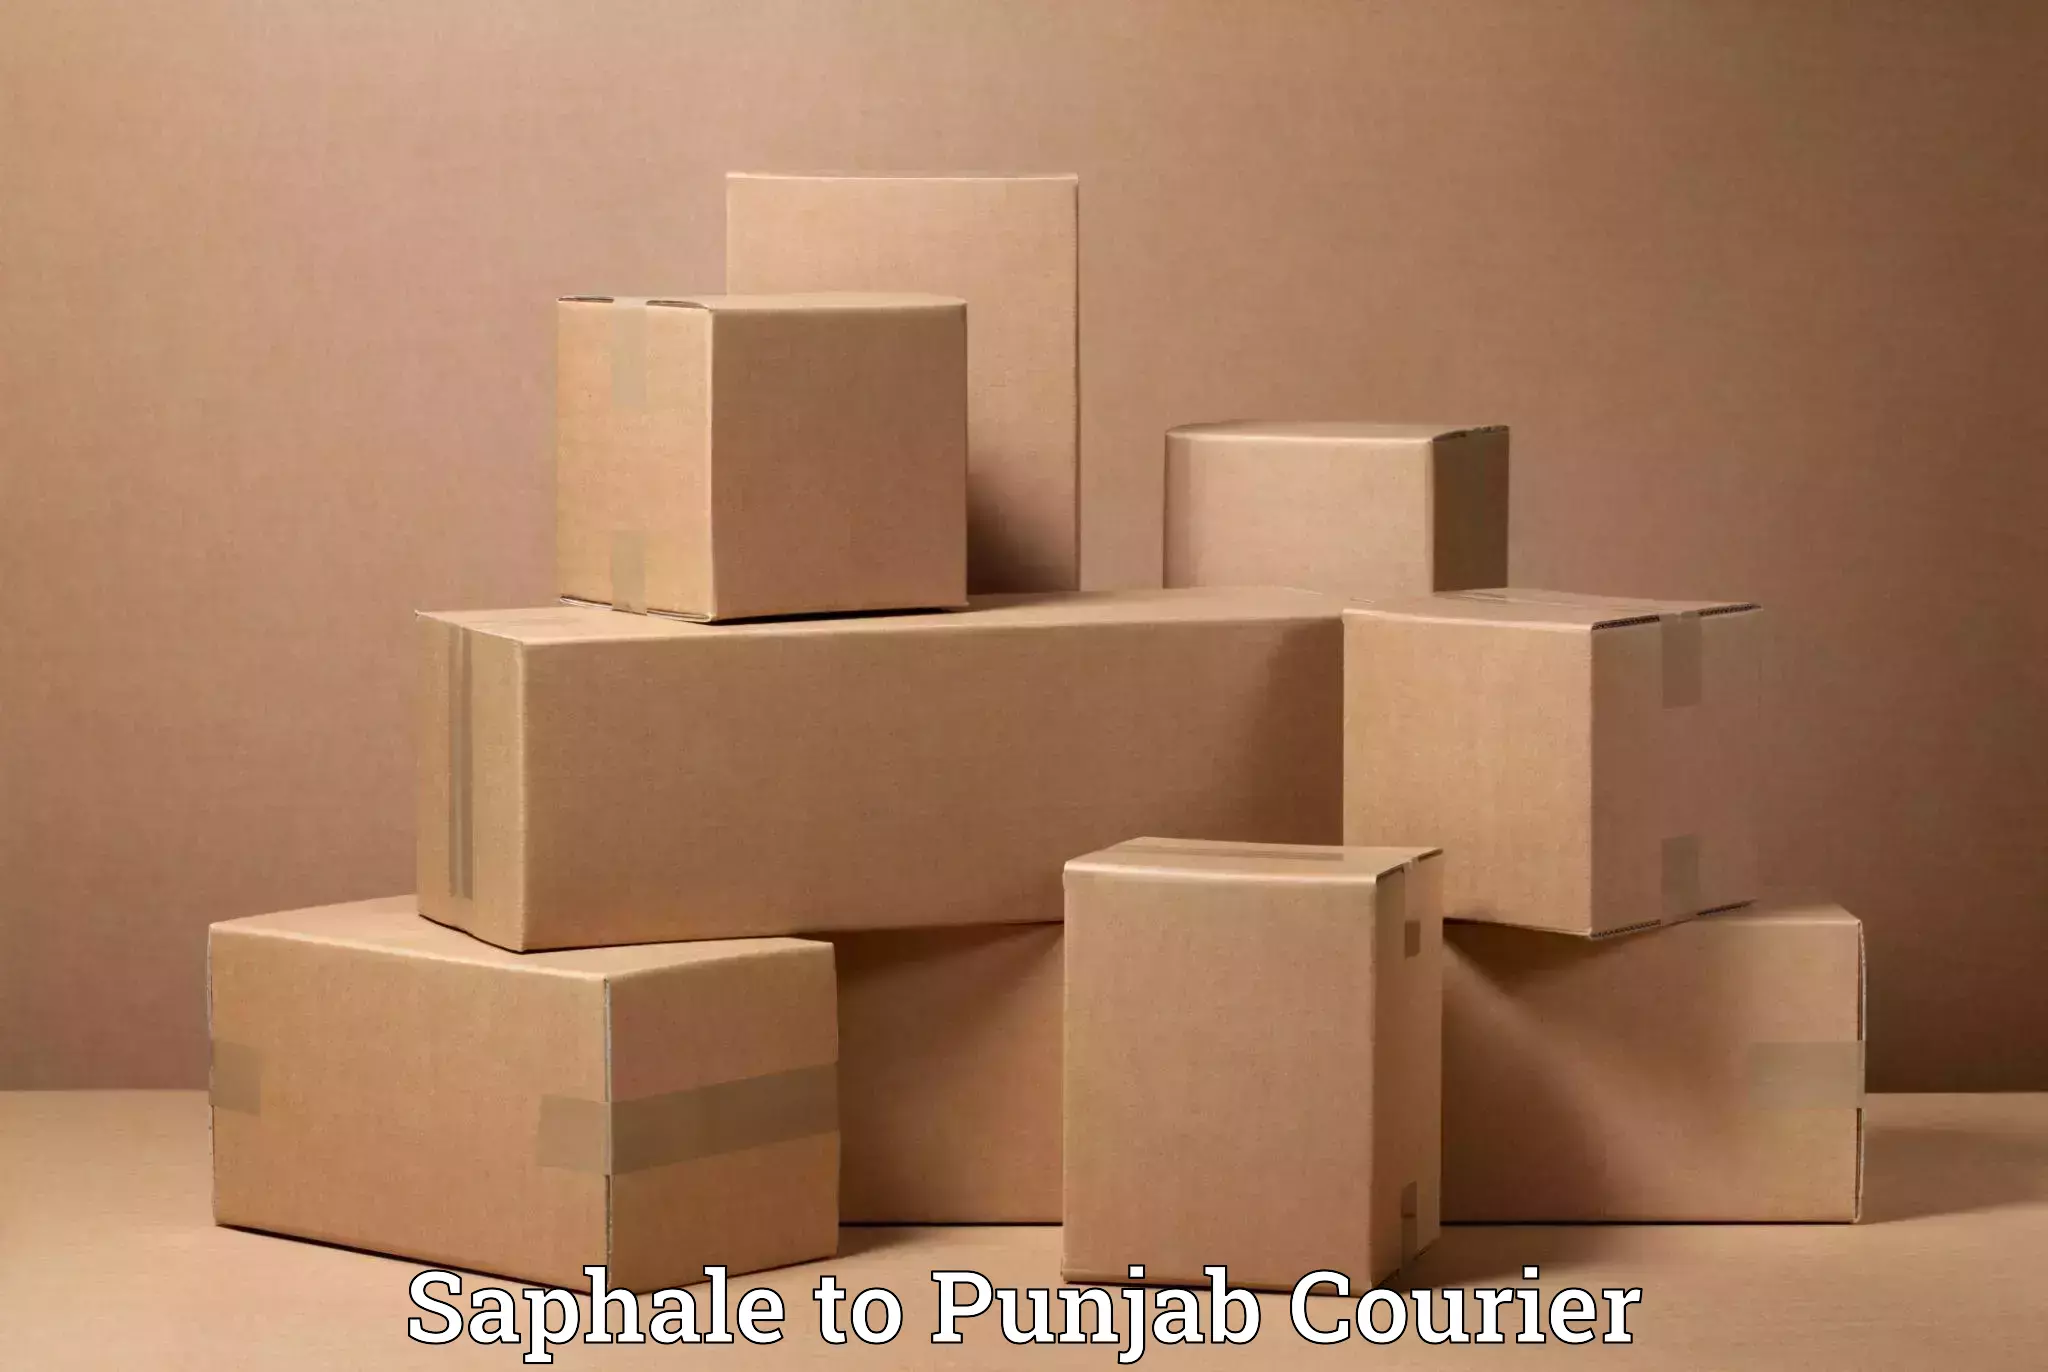 Specialized moving company in Saphale to Punjab